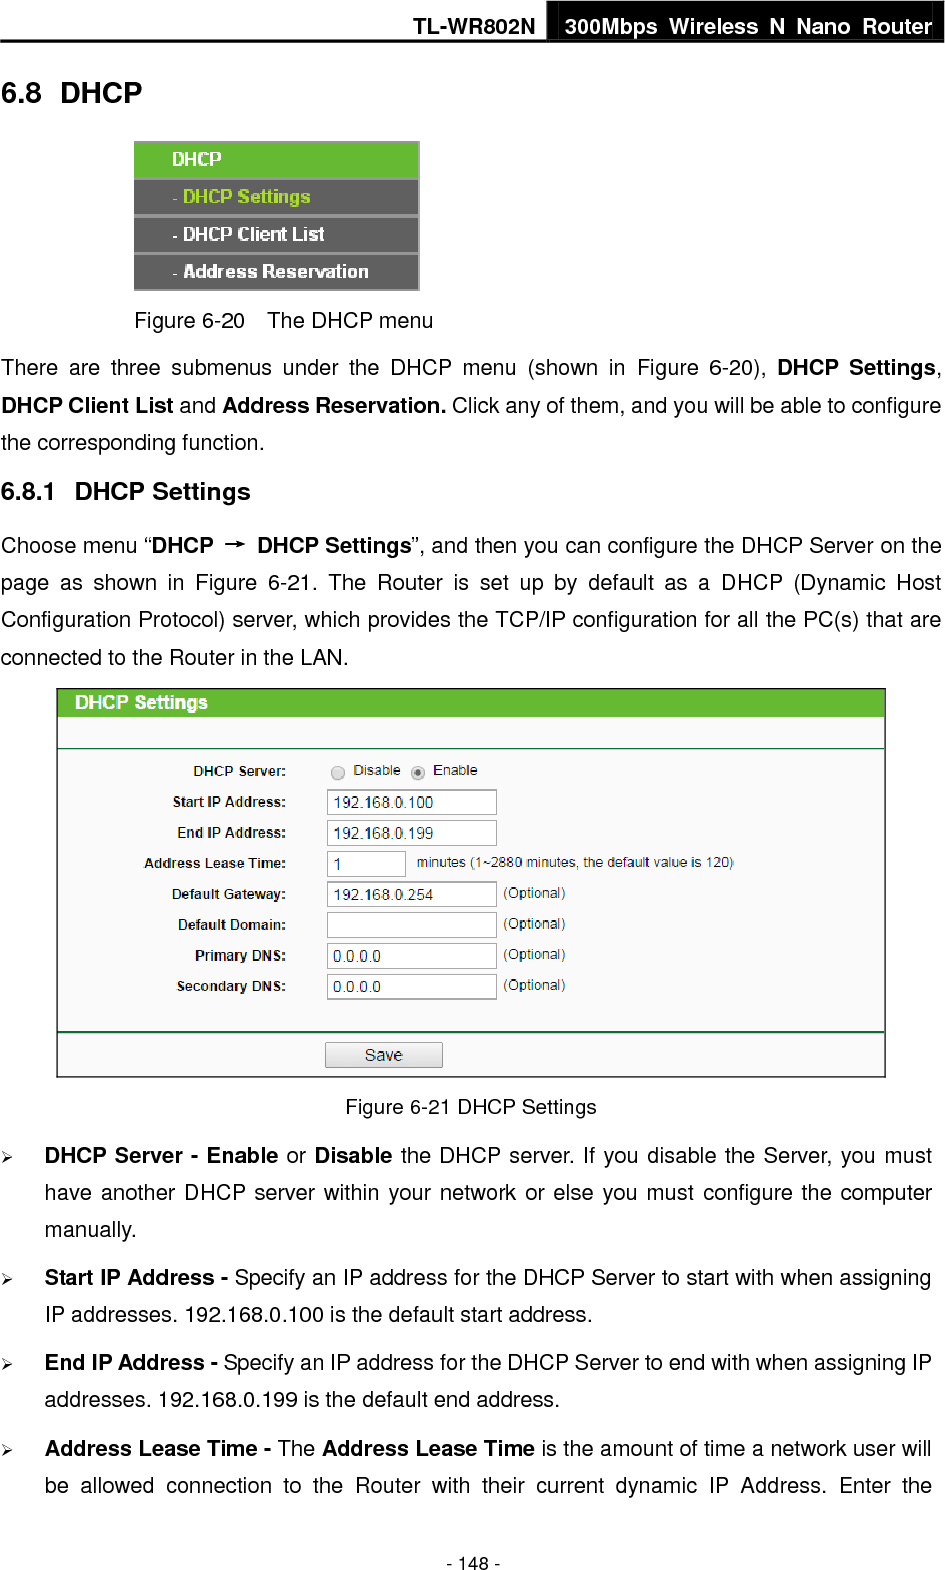 TL-WR802N 300Mbps  Wireless  N  Nano  Router  - 148 - 6.8  DHCP  Figure 6-20  The DHCP menu There  are  three  submenus  under  the  DHCP  menu  (shown  in  Figure  6-20),  DHCP  Settings, DHCP Client List and Address Reservation. Click any of them, and you will be able to configure the corresponding function. 6.8.1  DHCP Settings Choose menu “DHCP  →  DHCP Settings”, and then you can configure the DHCP Server on the page  as  shown  in  Figure  6-21.  The  Router  is  set  up  by  default  as  a  DHCP  (Dynamic  Host Configuration Protocol) server, which provides the TCP/IP configuration for all the PC(s) that are connected to the Router in the LAN.    Figure 6-21 DHCP Settings  DHCP Server - Enable or Disable the DHCP server. If you disable the Server, you must have another DHCP server within your network or else you must configure the computer manually.  Start IP Address - Specify an IP address for the DHCP Server to start with when assigning IP addresses. 192.168.0.100 is the default start address.  End IP Address - Specify an IP address for the DHCP Server to end with when assigning IP addresses. 192.168.0.199 is the default end address.  Address Lease Time - The Address Lease Time is the amount of time a network user will be  allowed  connection  to  the  Router  with  their  current  dynamic  IP  Address.  Enter  the 